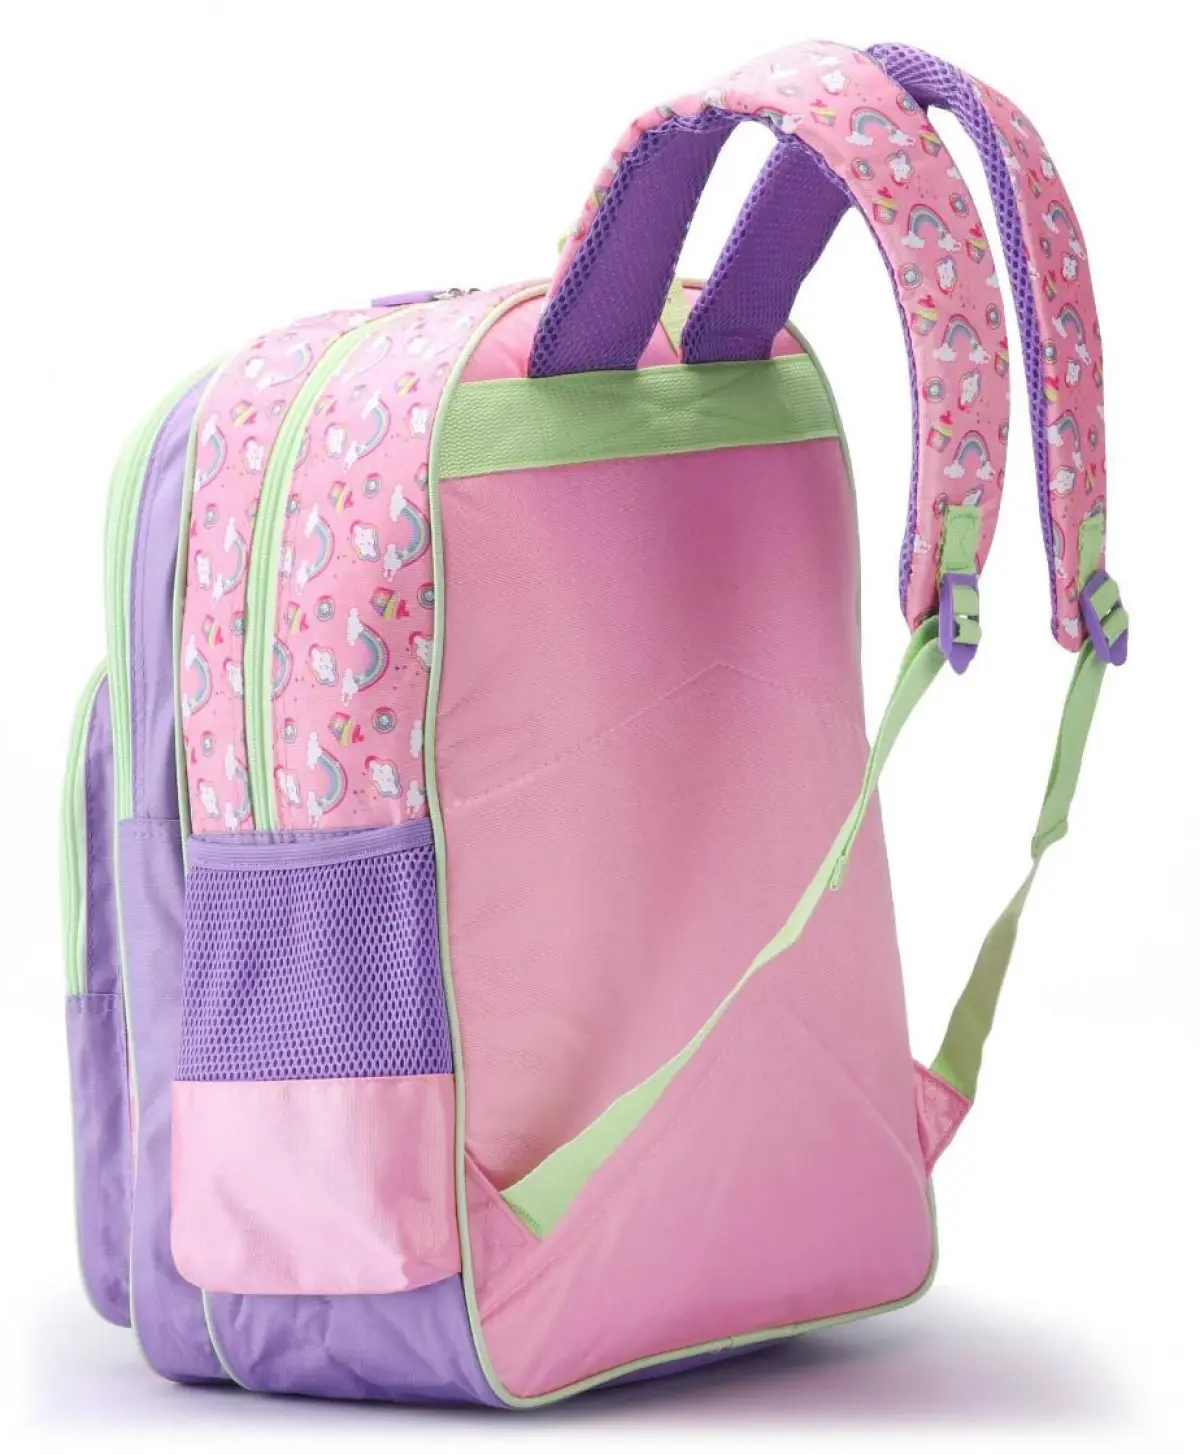 Striders 18 inches Barbie School Bag Dreams in Style for Little Fashionistas Multicolor For Kids Ages 8Y+